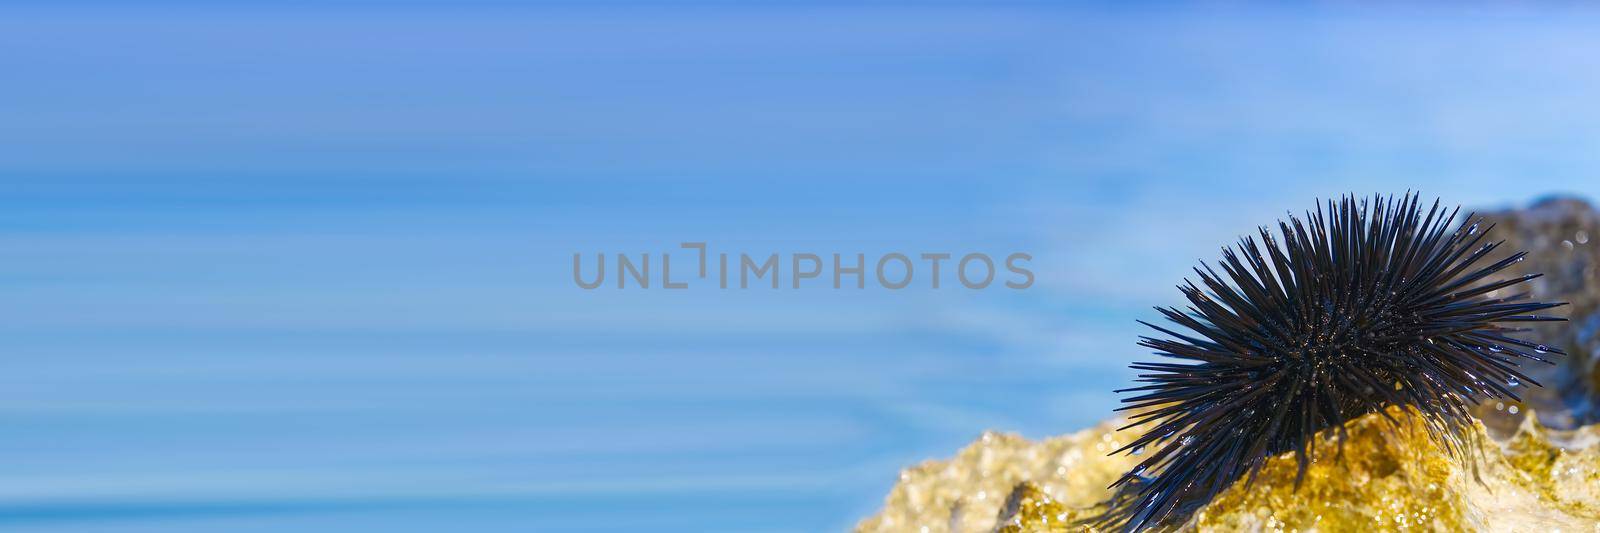 close-up sea urchin on rock with blue sea in background by PhotoTime